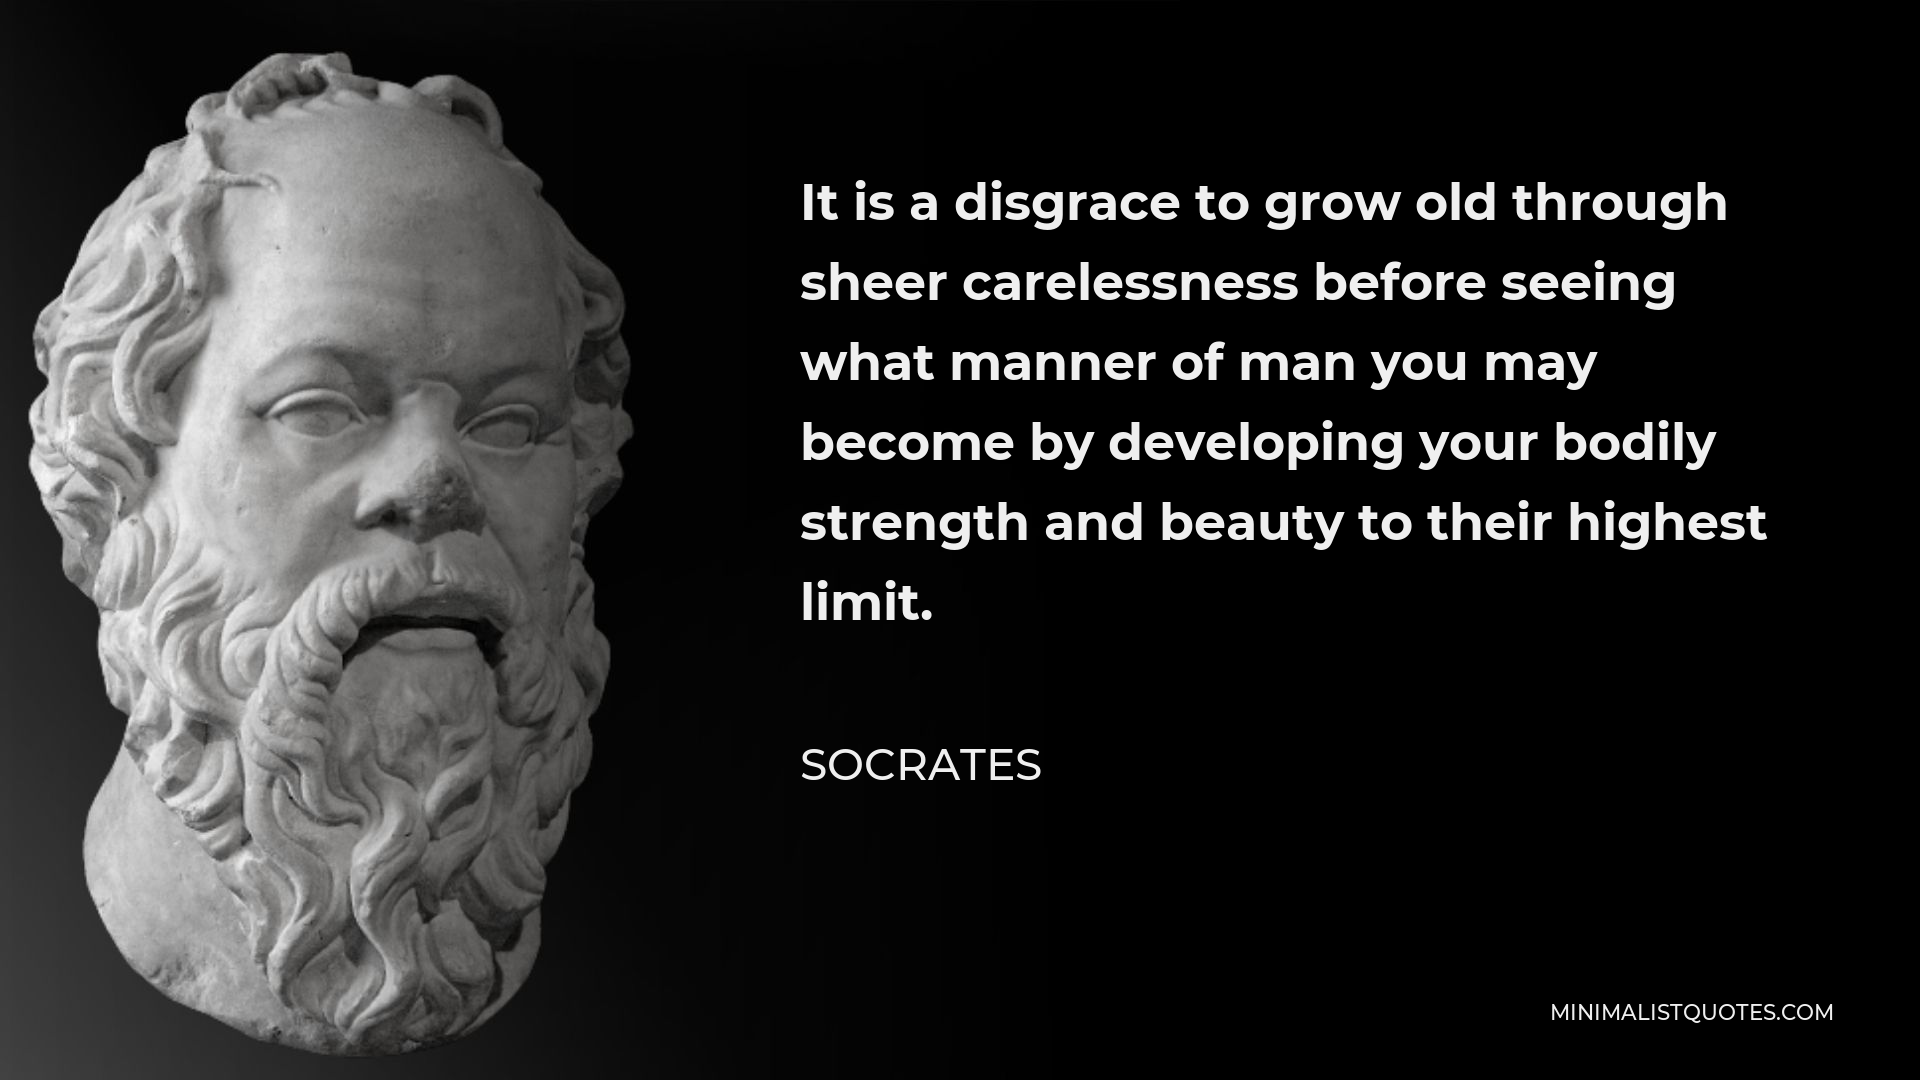 Socrates Quote - It is a disgrace to grow old through sheer carelessness before seeing what manner of man you may become by developing your bodily strength and beauty to their highest limit.